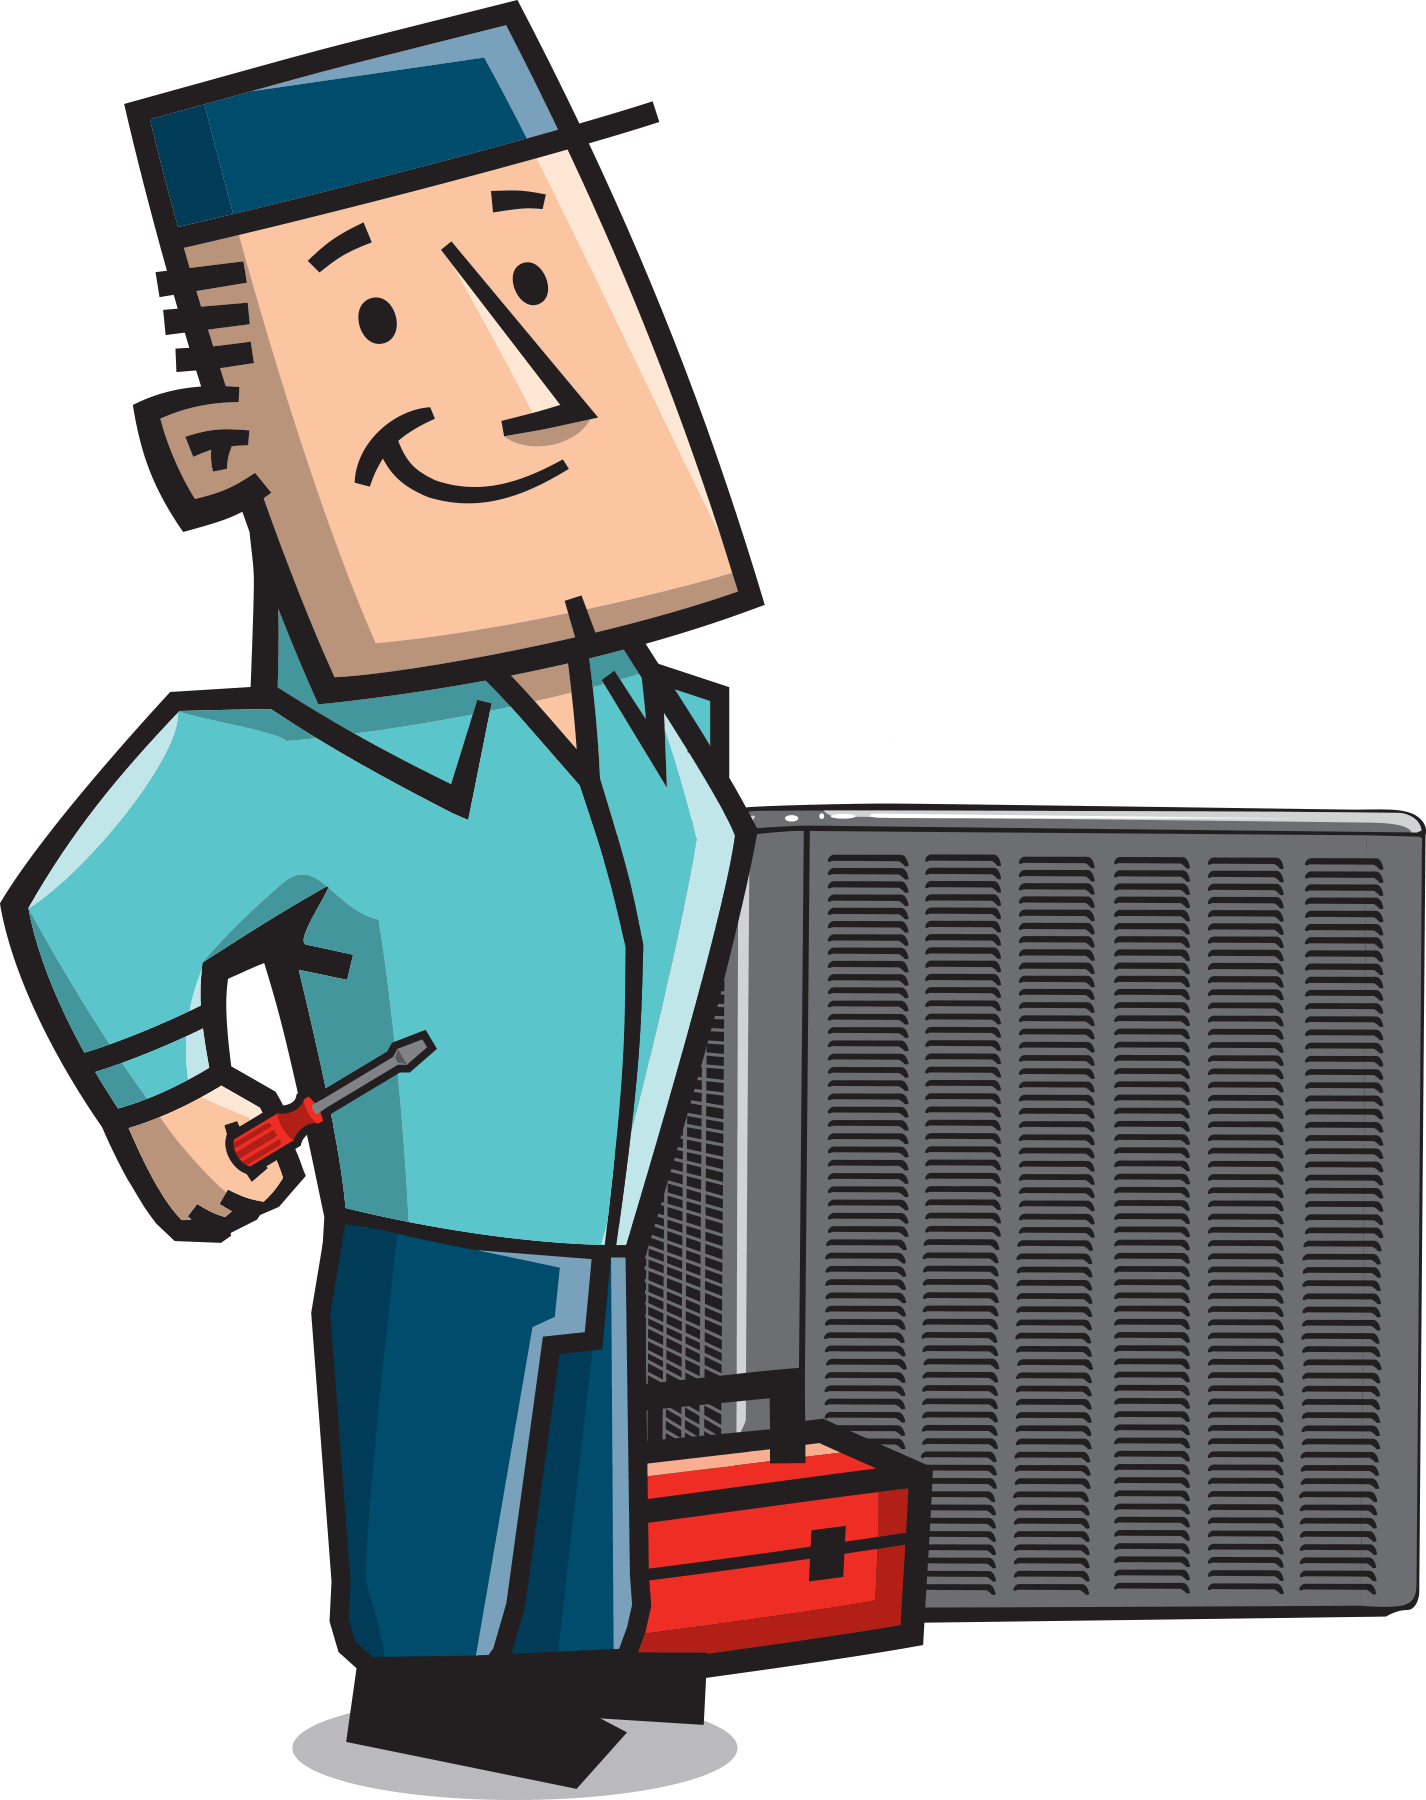 Call us for Furnace repair Naperville IL.